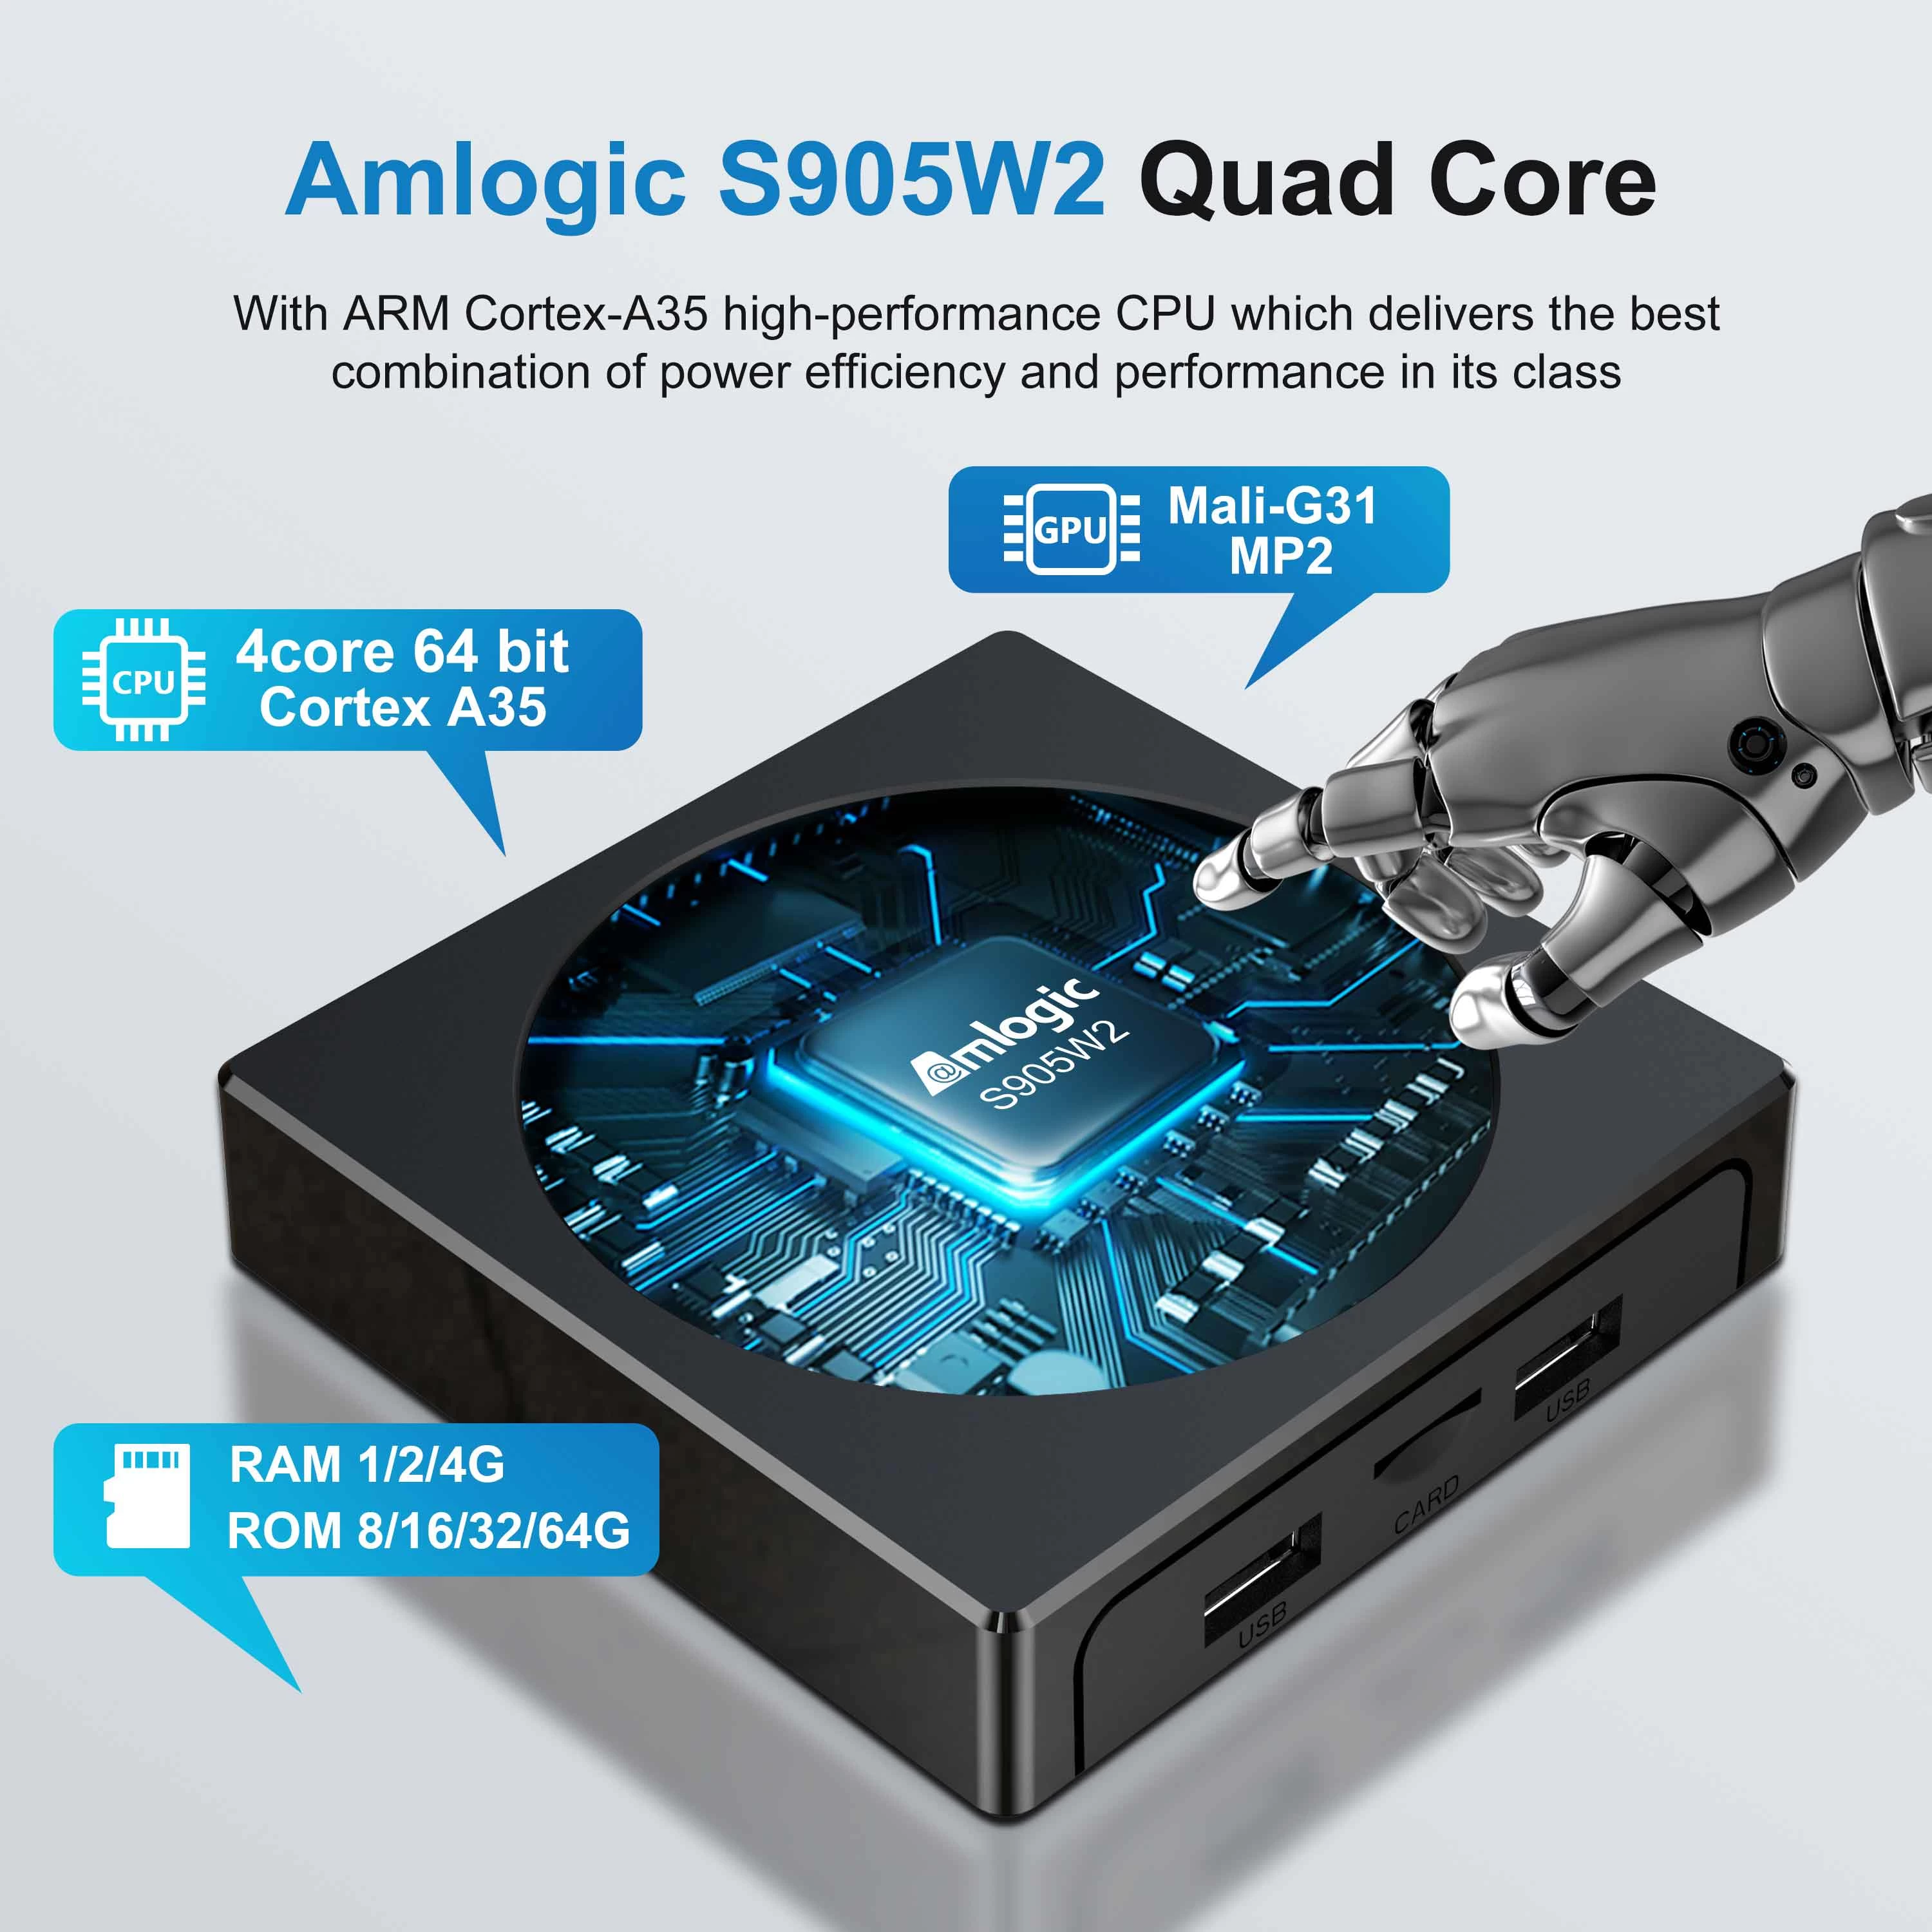 The difference between chip Amlogic Amlogic S905W2 and chip Amlogic S905W